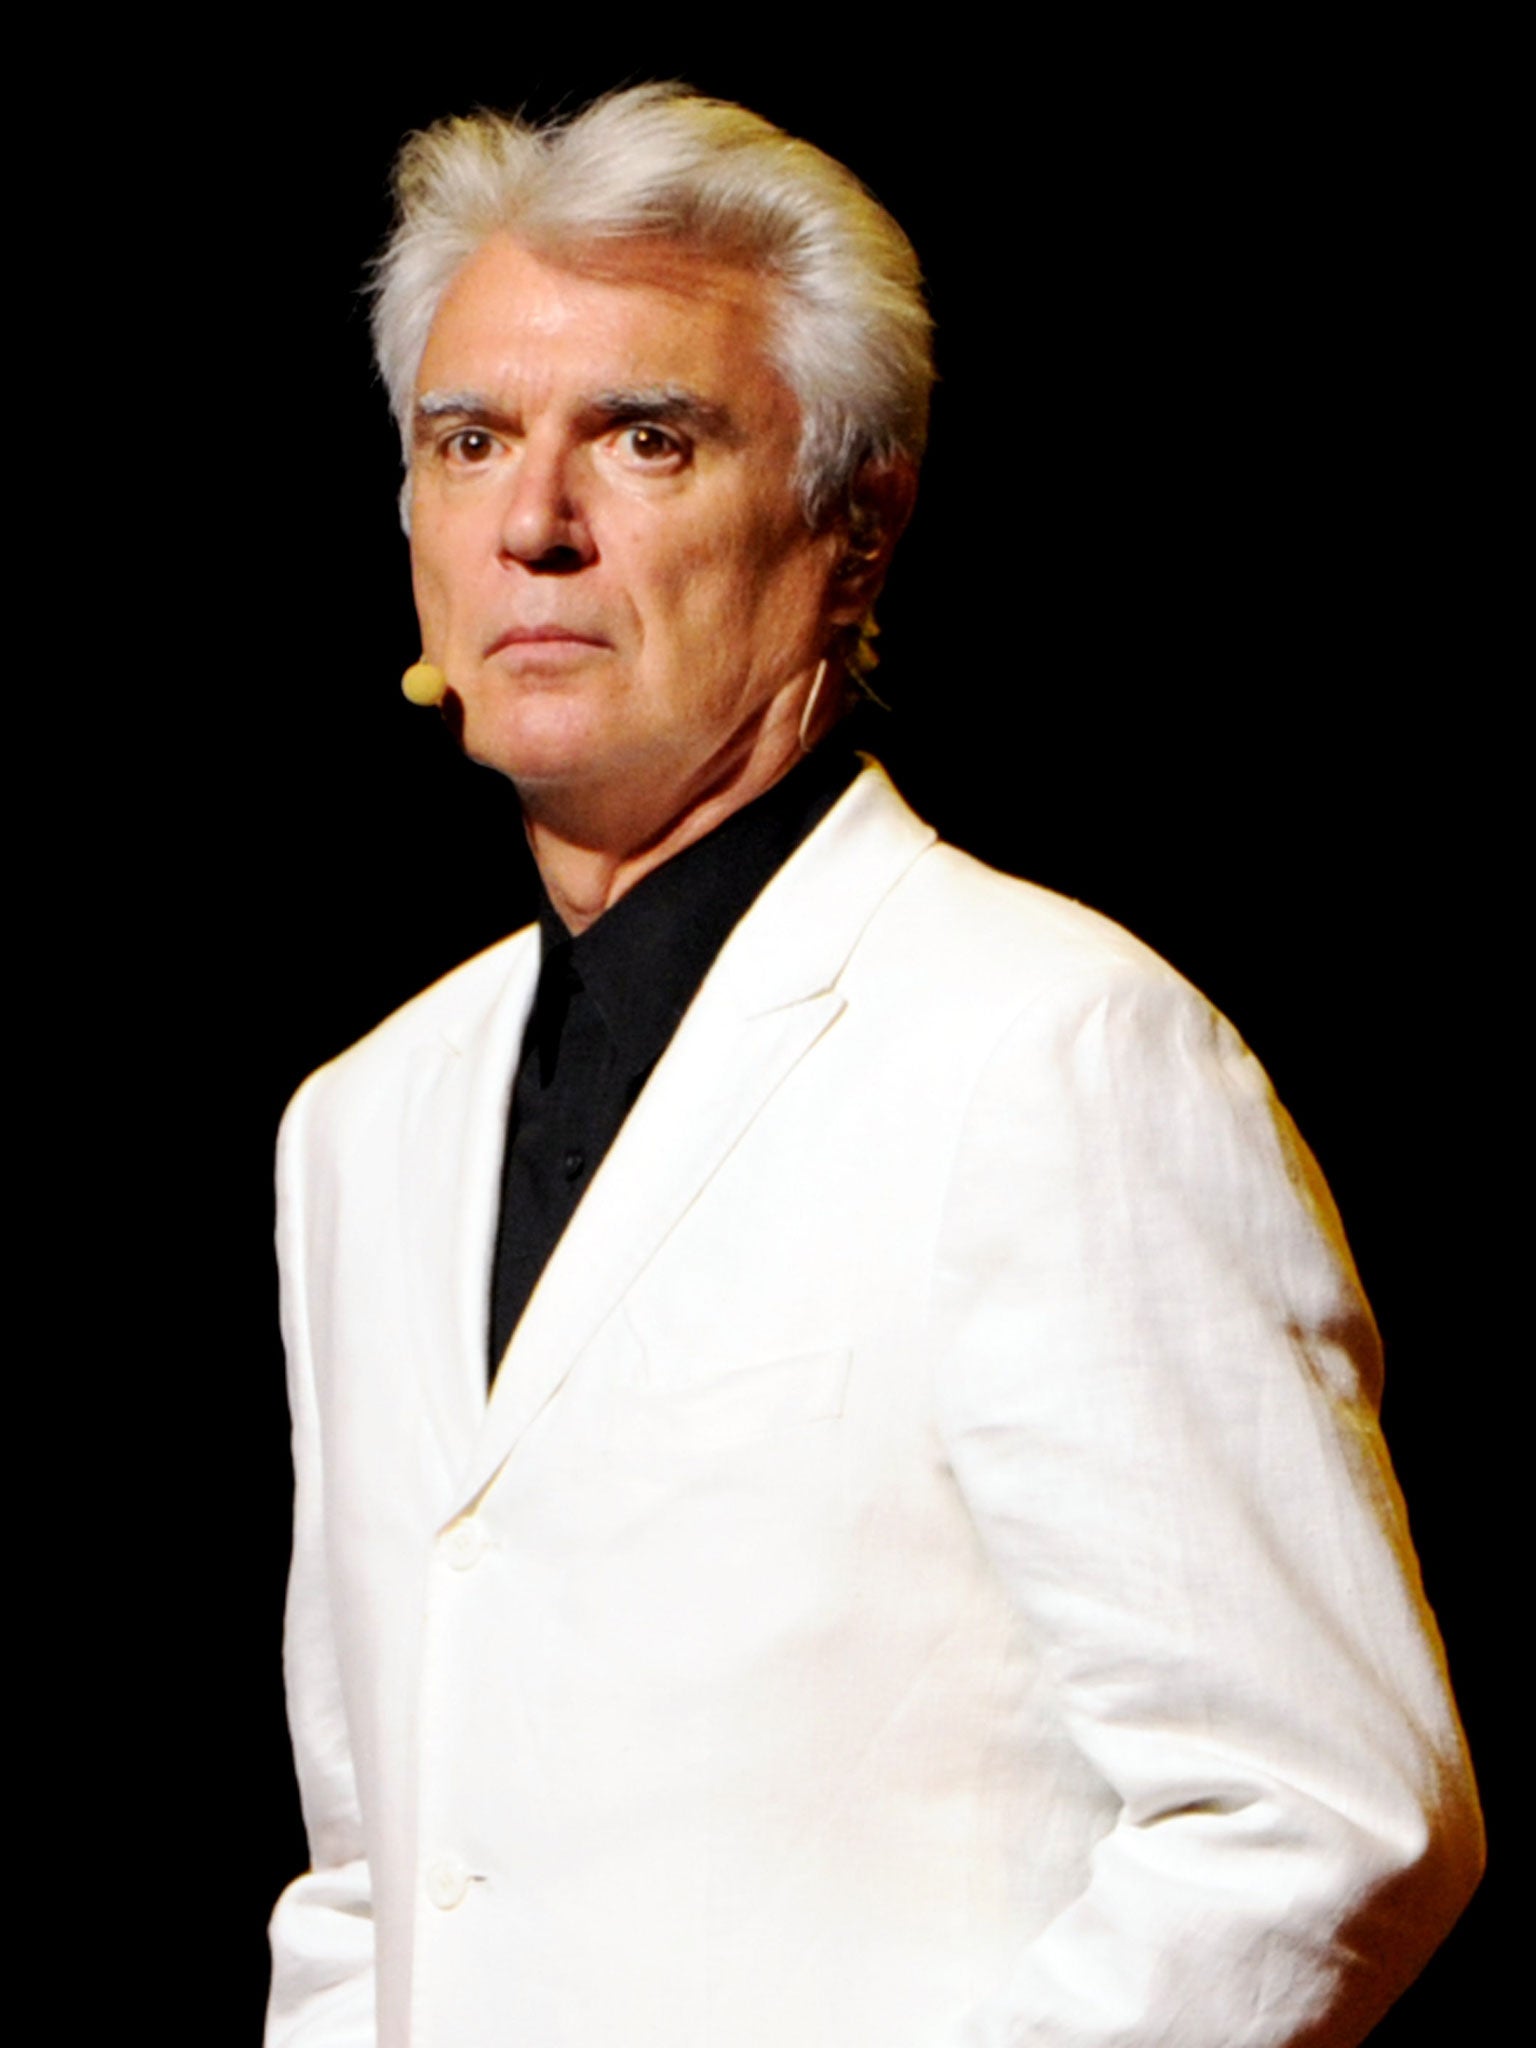 David Byrne took to the stage at Columbia University School of the Arts as a band played his song 'Road to Nowhere'. He then played a slideshow of graphs to illustrate how hopeless arts graduates are